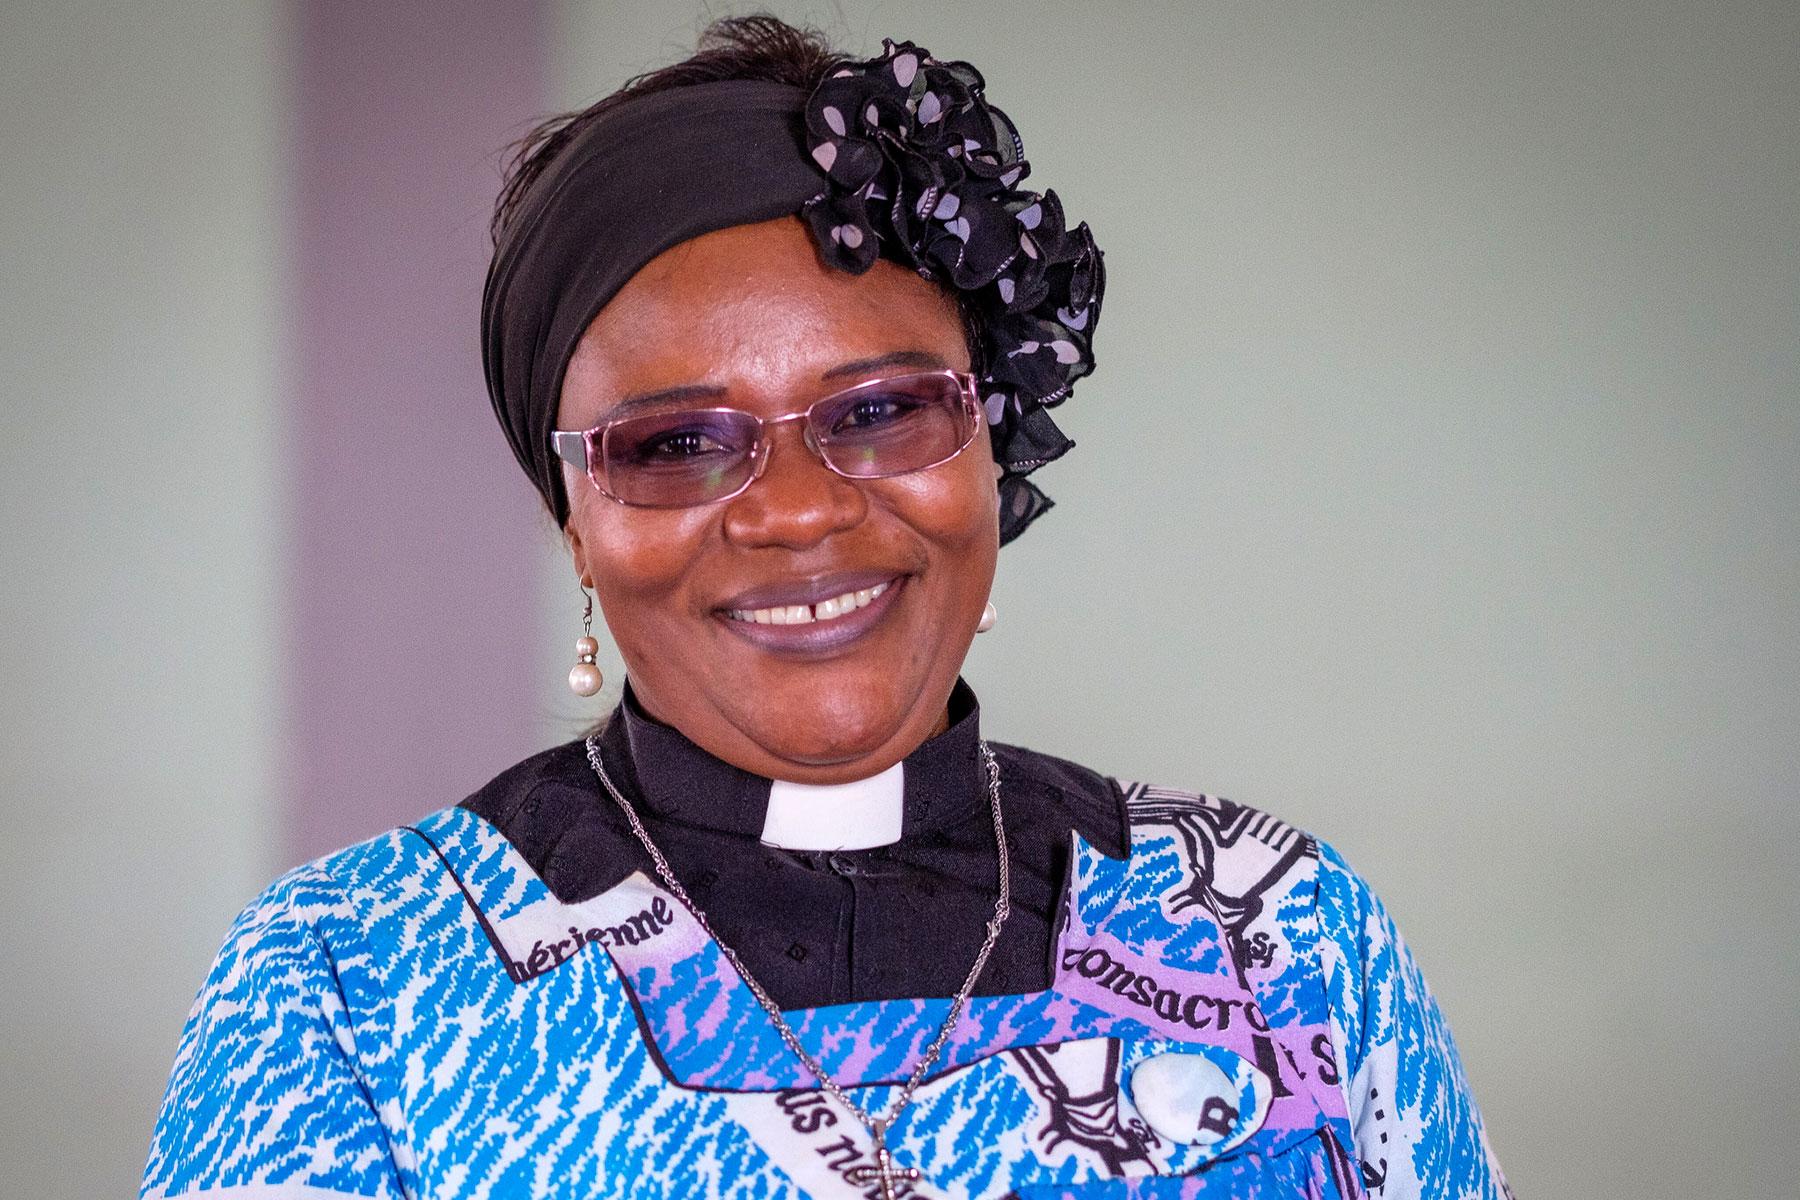 Rev. Dr Jeannette Ada Epse Maina is pictured at the 2018 LWF Council meeting in Geneva. The LWF Council meets yearly and is the highest authority of the LWF between assemblies. It consists of the President, the Chairperson of the Finance Committee, and 48 members from LWF member churches in seven regions. Photo: Albin Hillert/LWF